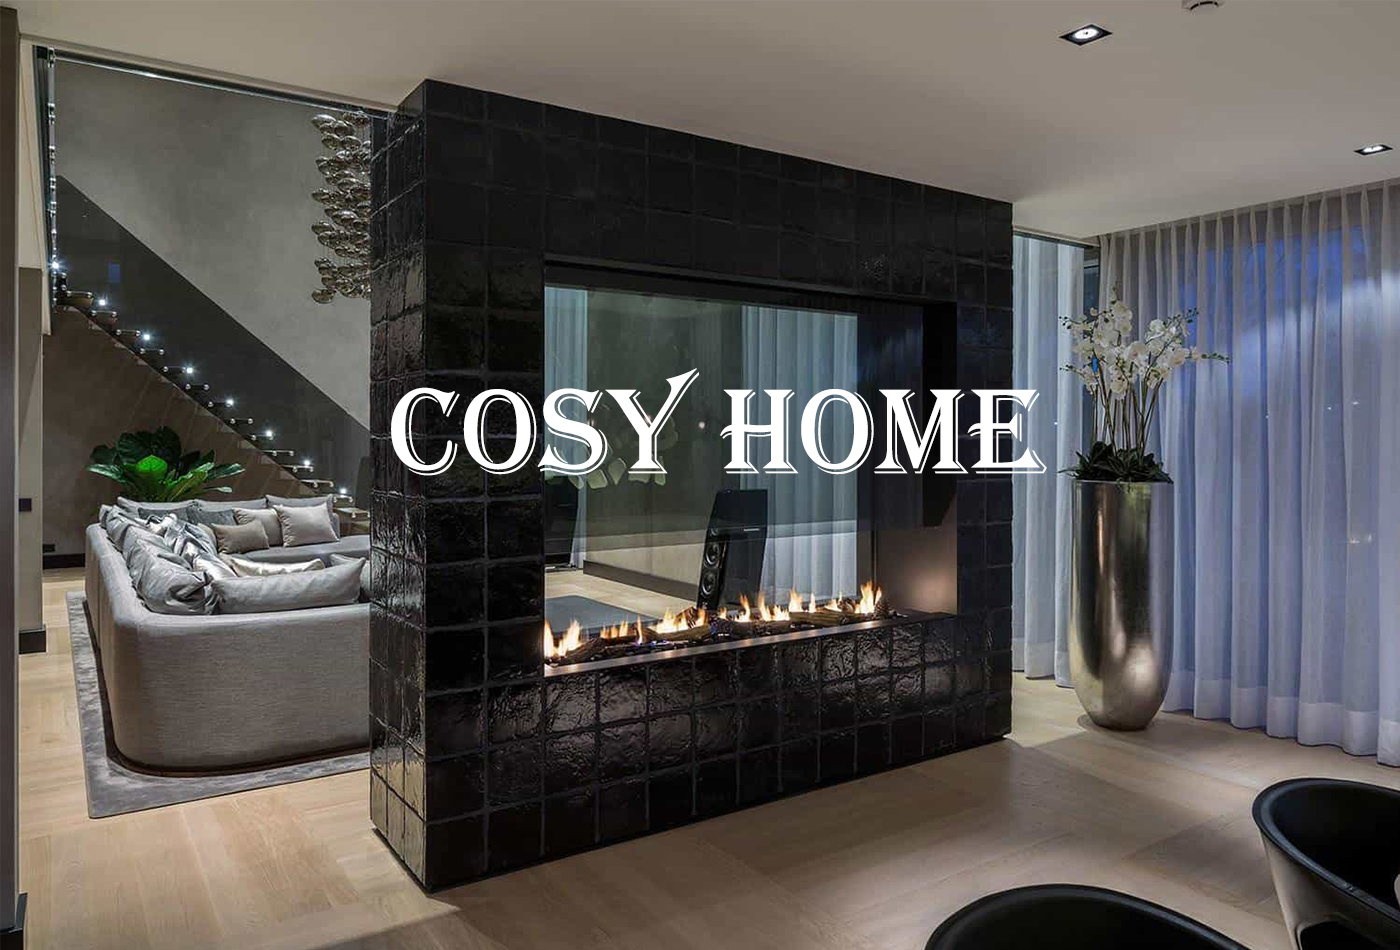 How to Create a Cosy Home? Interior Design Ideas and Tips